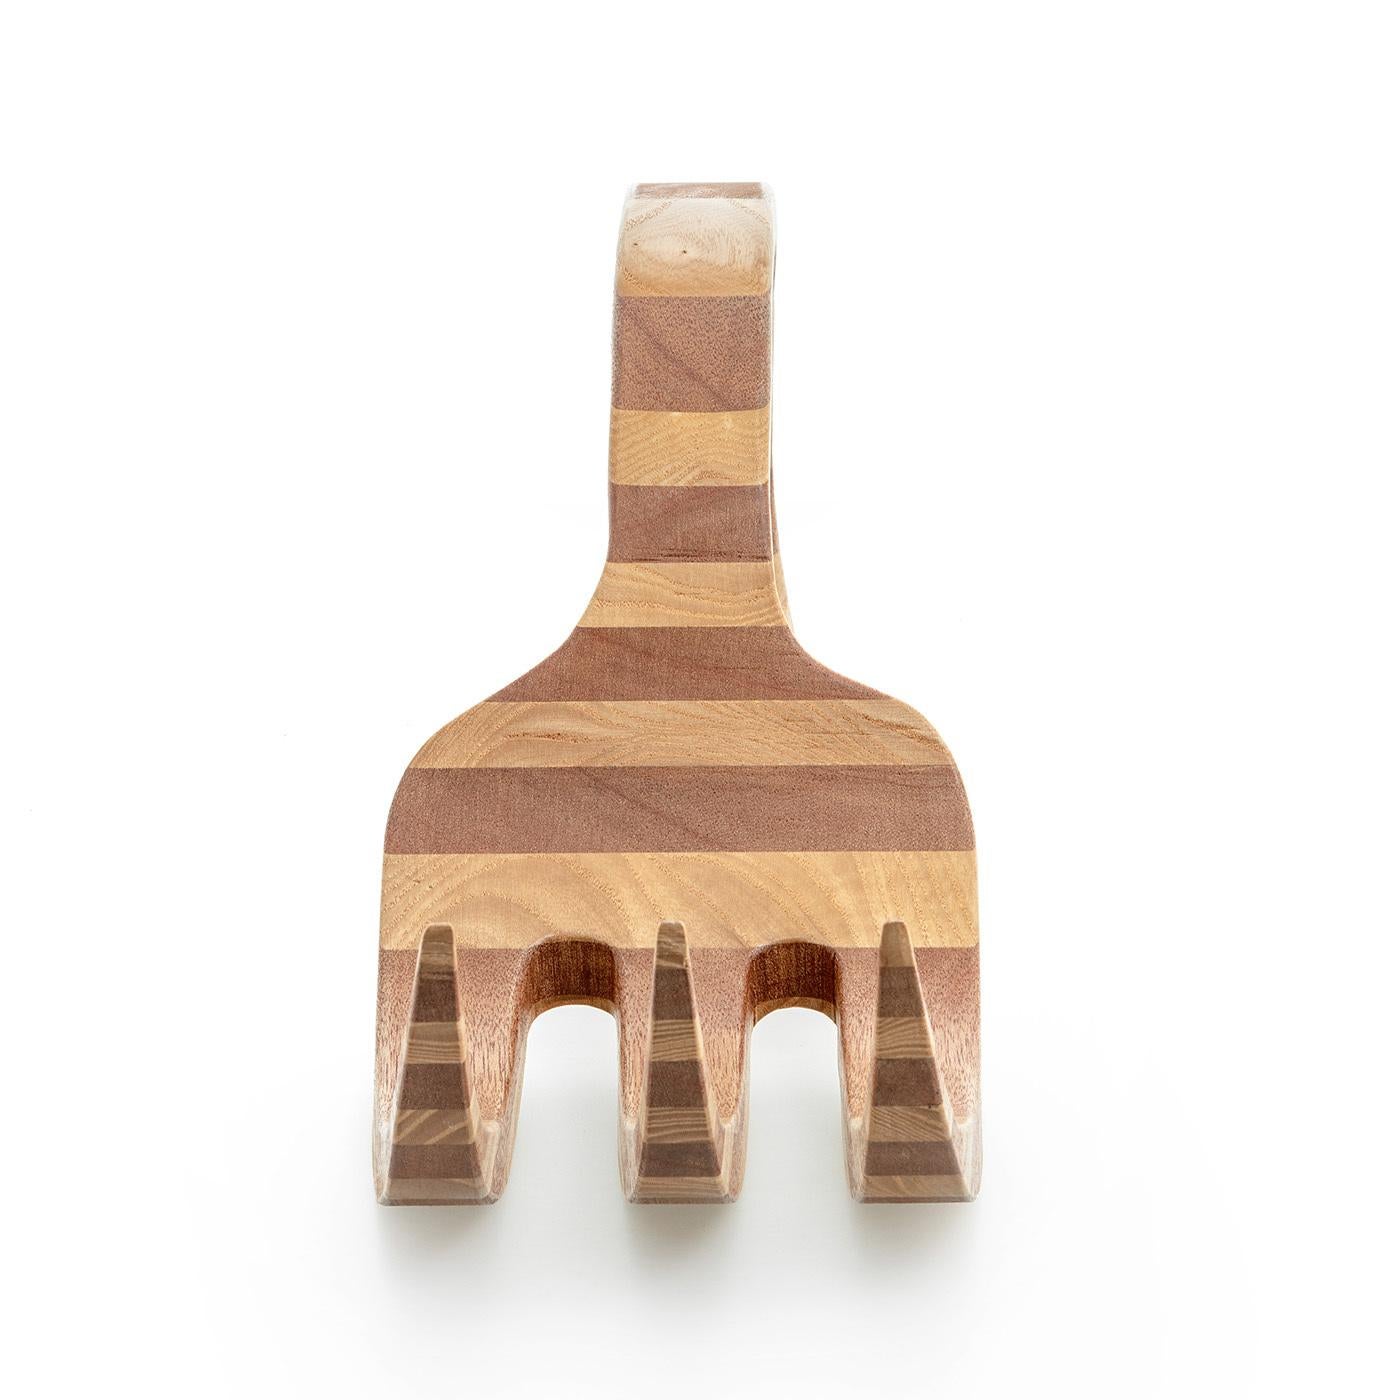 This charming wooden Fork sculpture is entirely handcrafted of prized cherry and pear woods, whose perpendicular stripes accentuate the dramatic curve of the handle. The lovely, two-tone, light and dark color scheme is a delicate finishing touch,